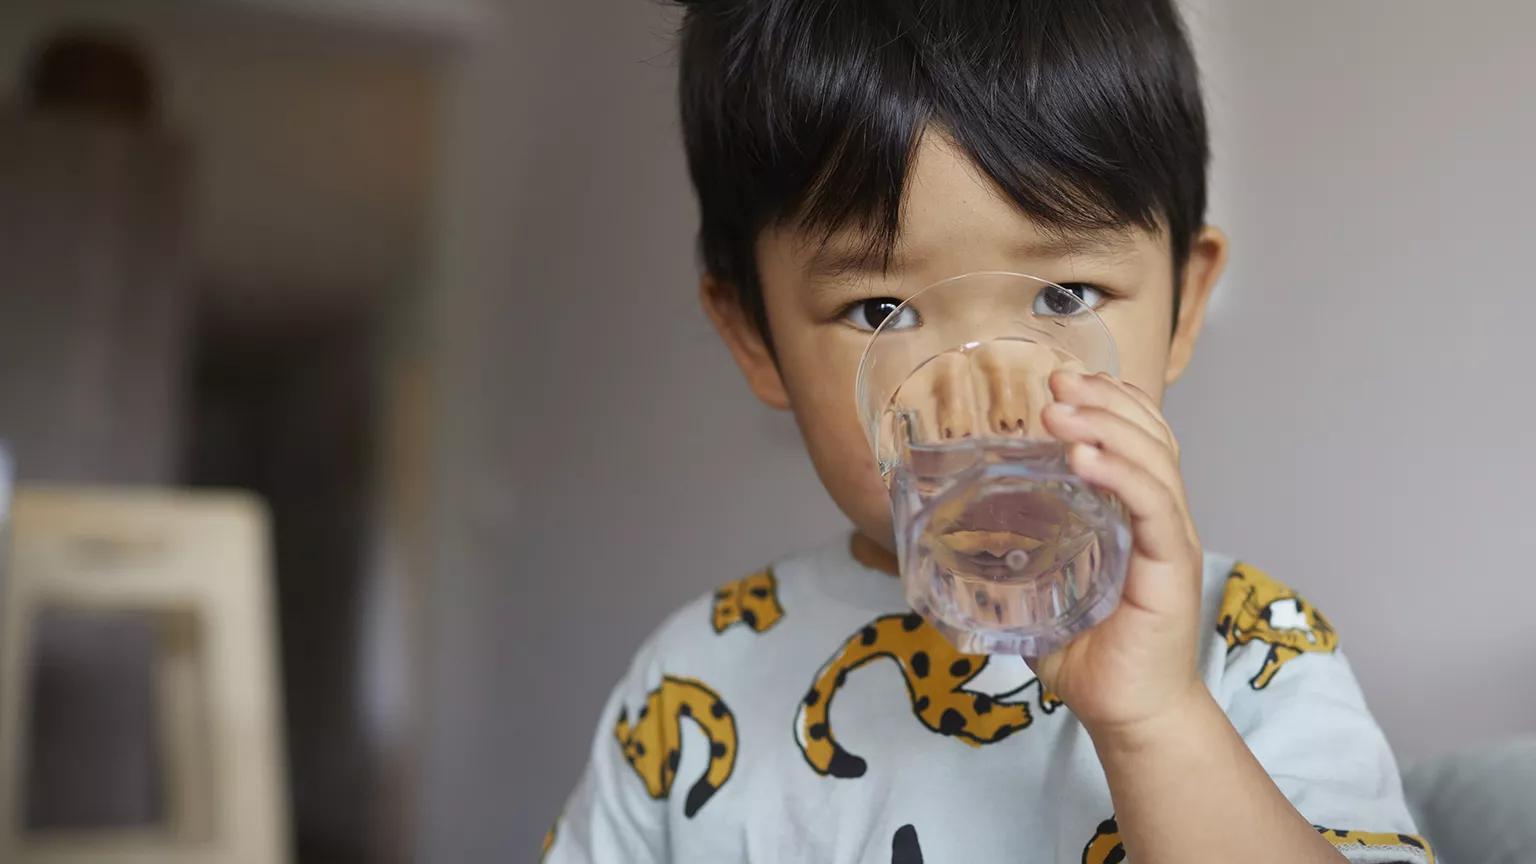 A young child facing the camera and drinking water from a glass